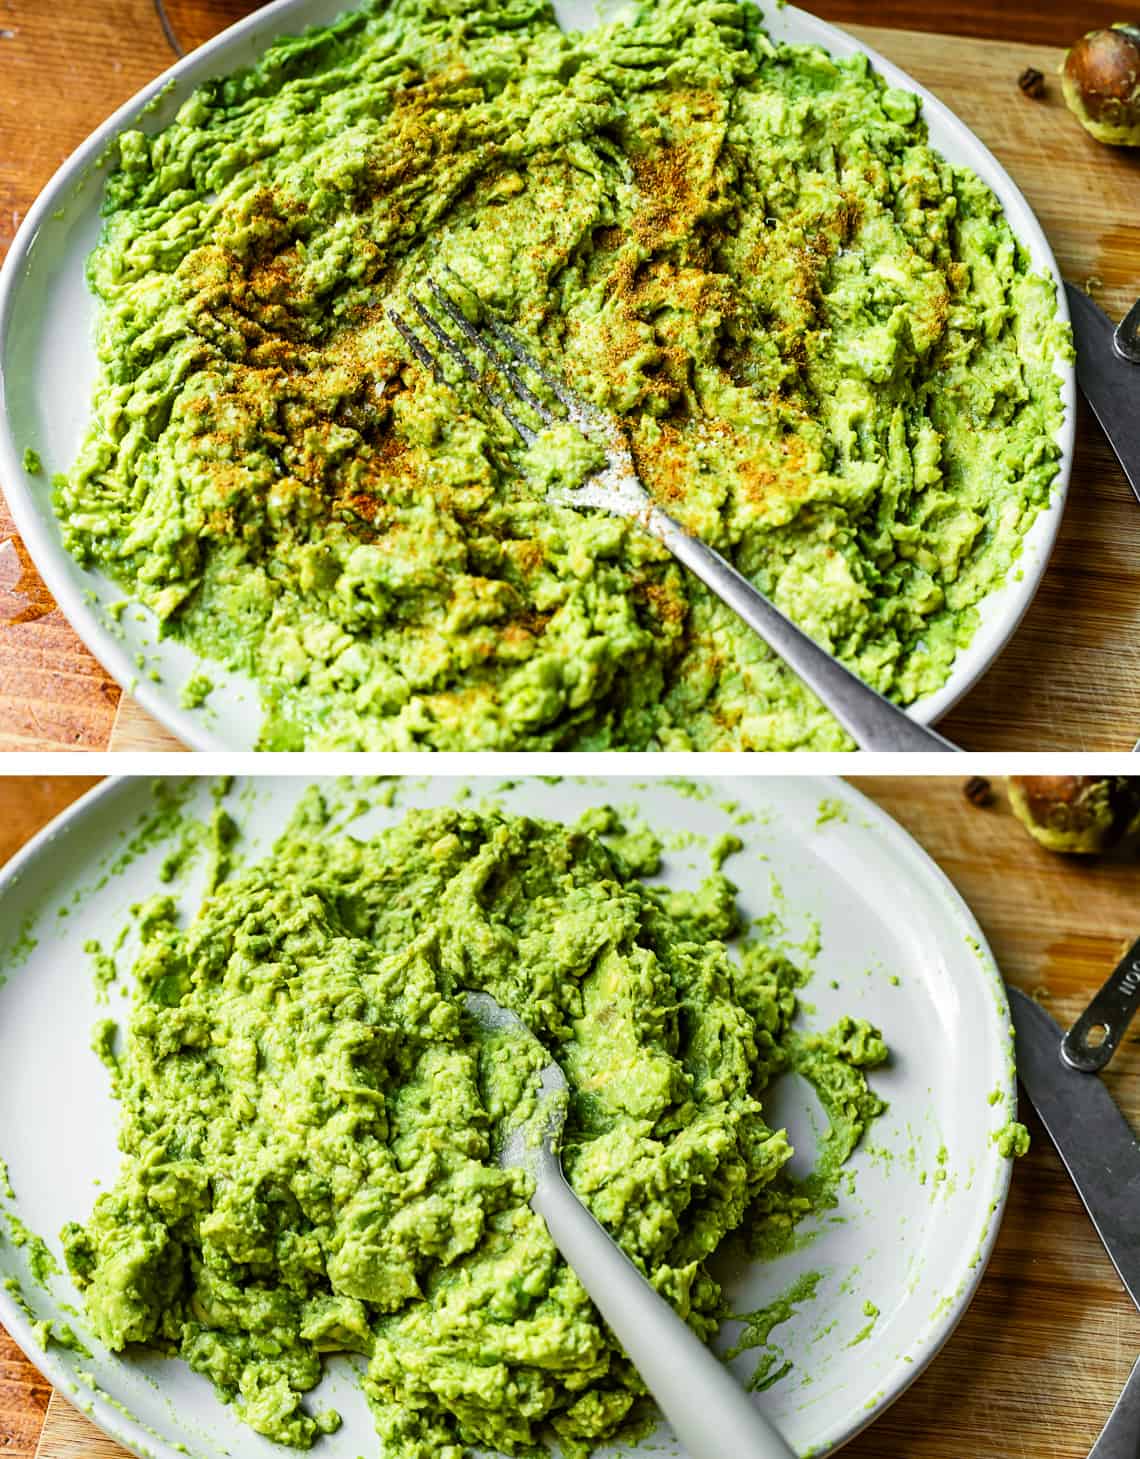 top smashed avocado with seasonings sprinkled over, bottom using a spatula to mix it together.